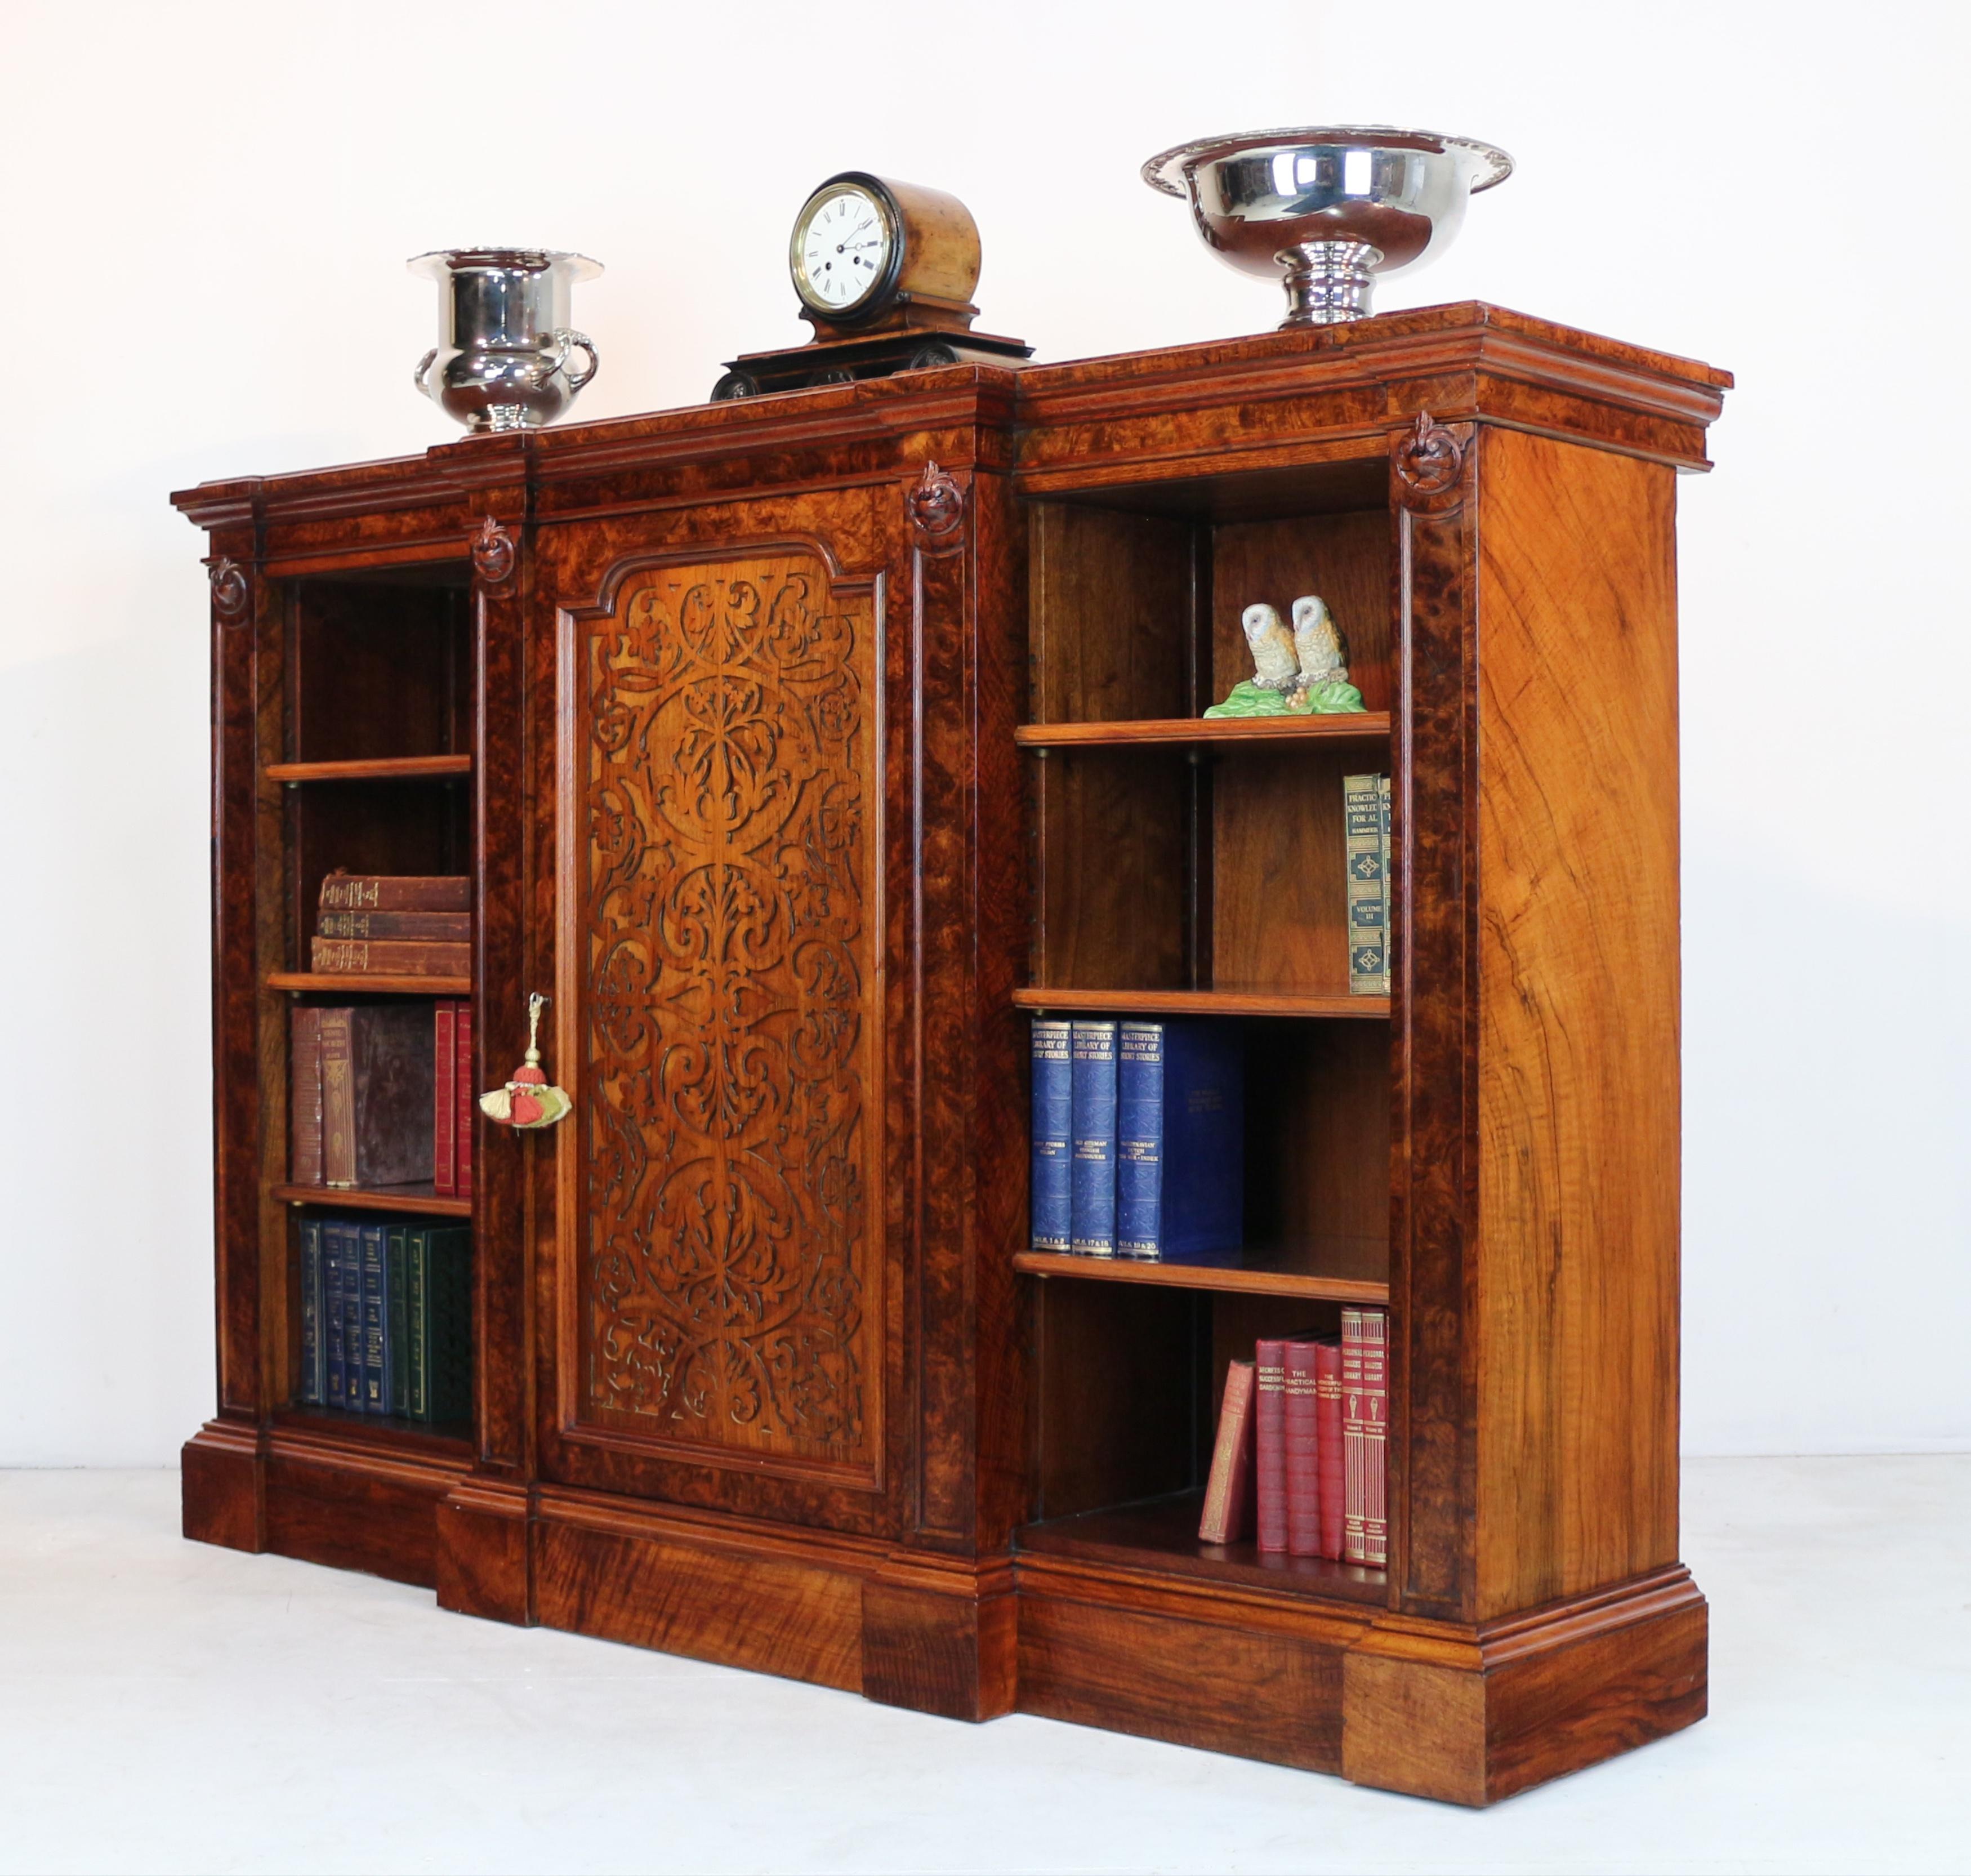 Super Victorian burr walnut breakfront bookcase or side cabinet, circa 1850, of fine quality with a double moulded top above a frieze with carved roundels and fielded panels to the pilasters and a central cupboard door with arabesque pattern blind